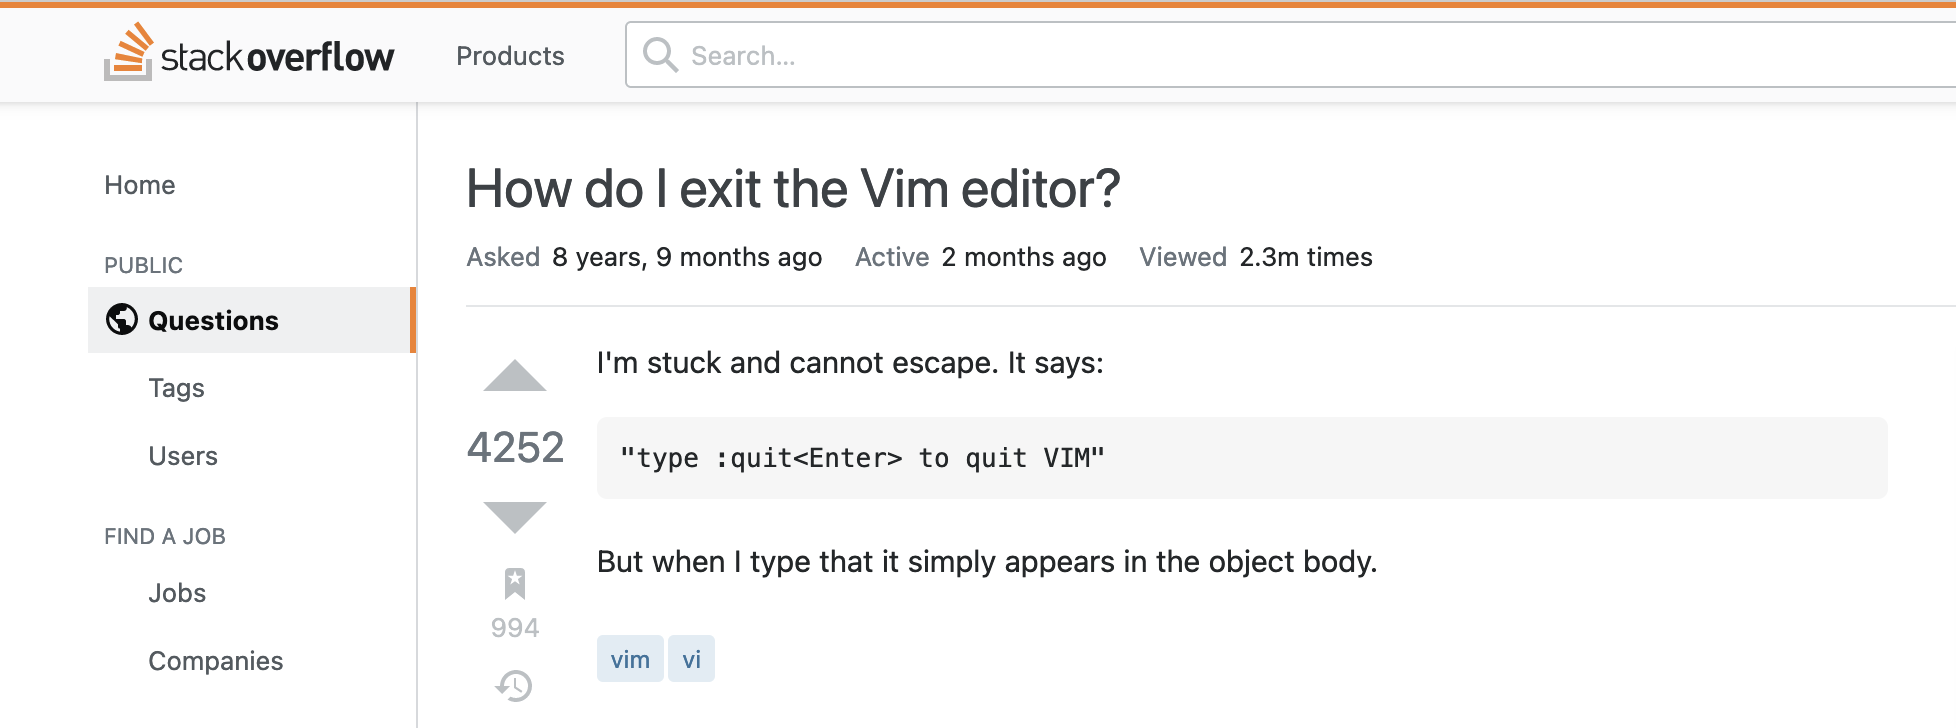 StackOverflow: How do I exit the Vim editor?